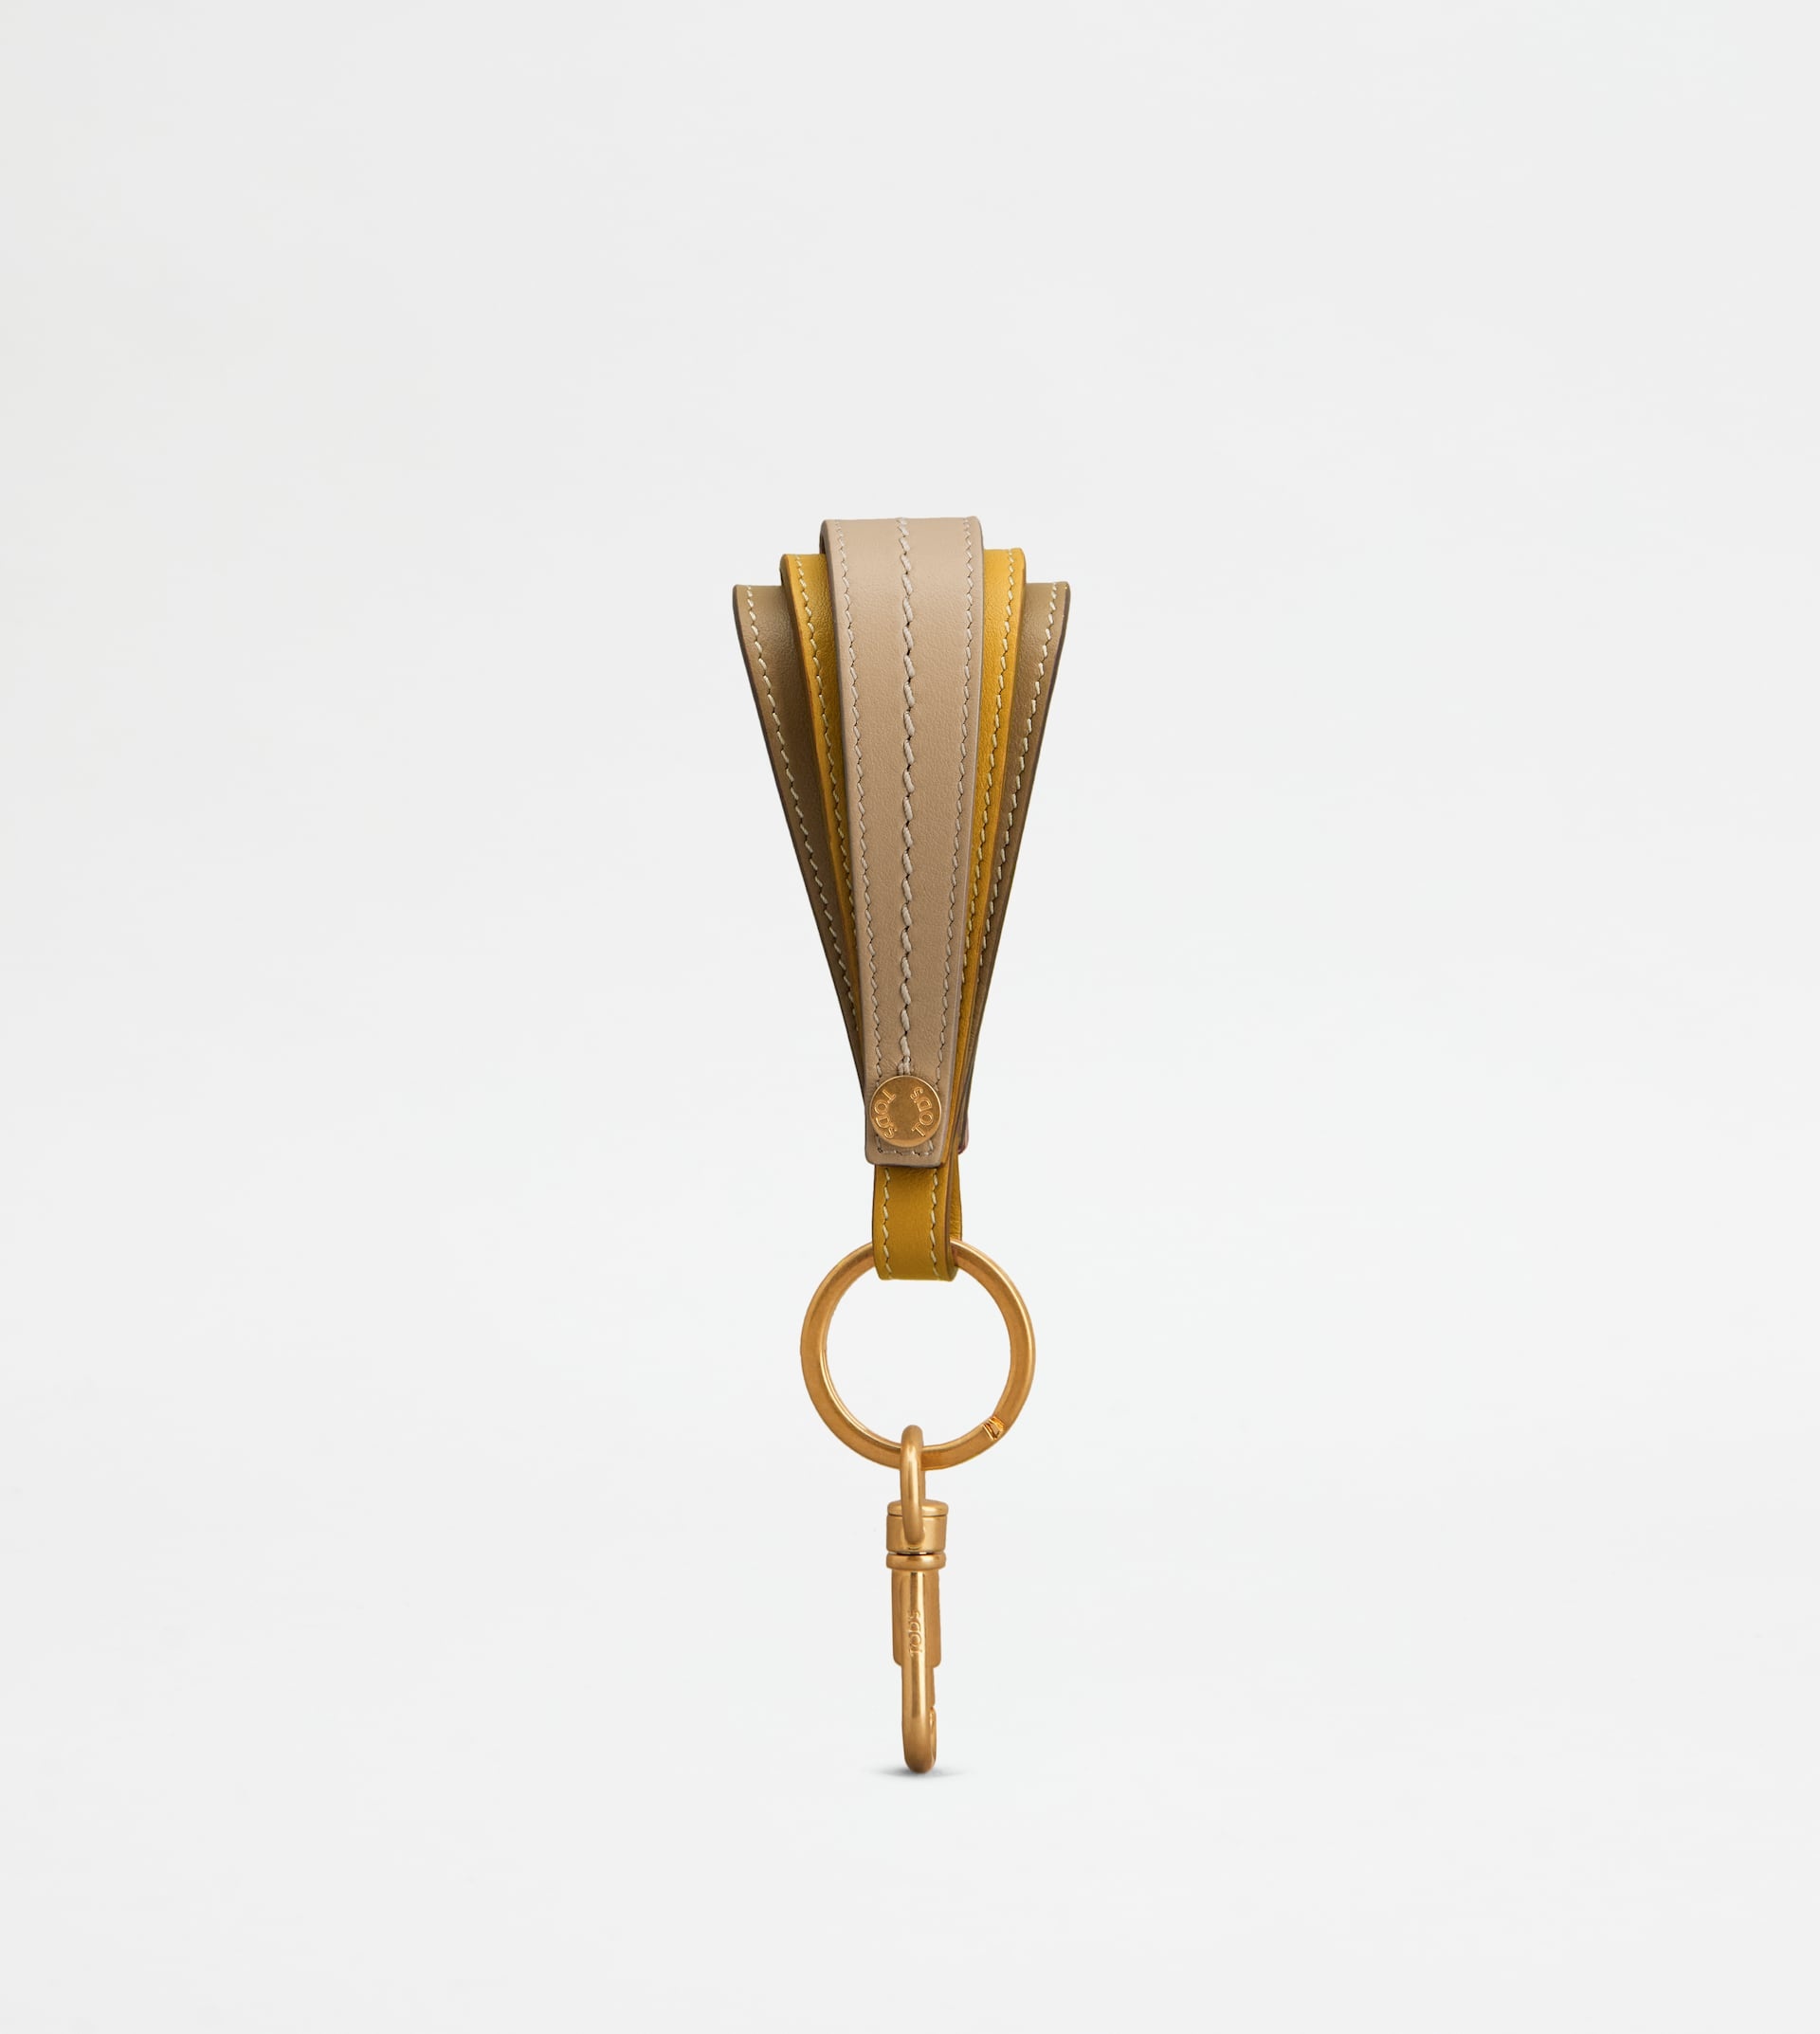 KEY HOLDER IN LEATHER - BEIGE, YELLOW, BROWN - 1